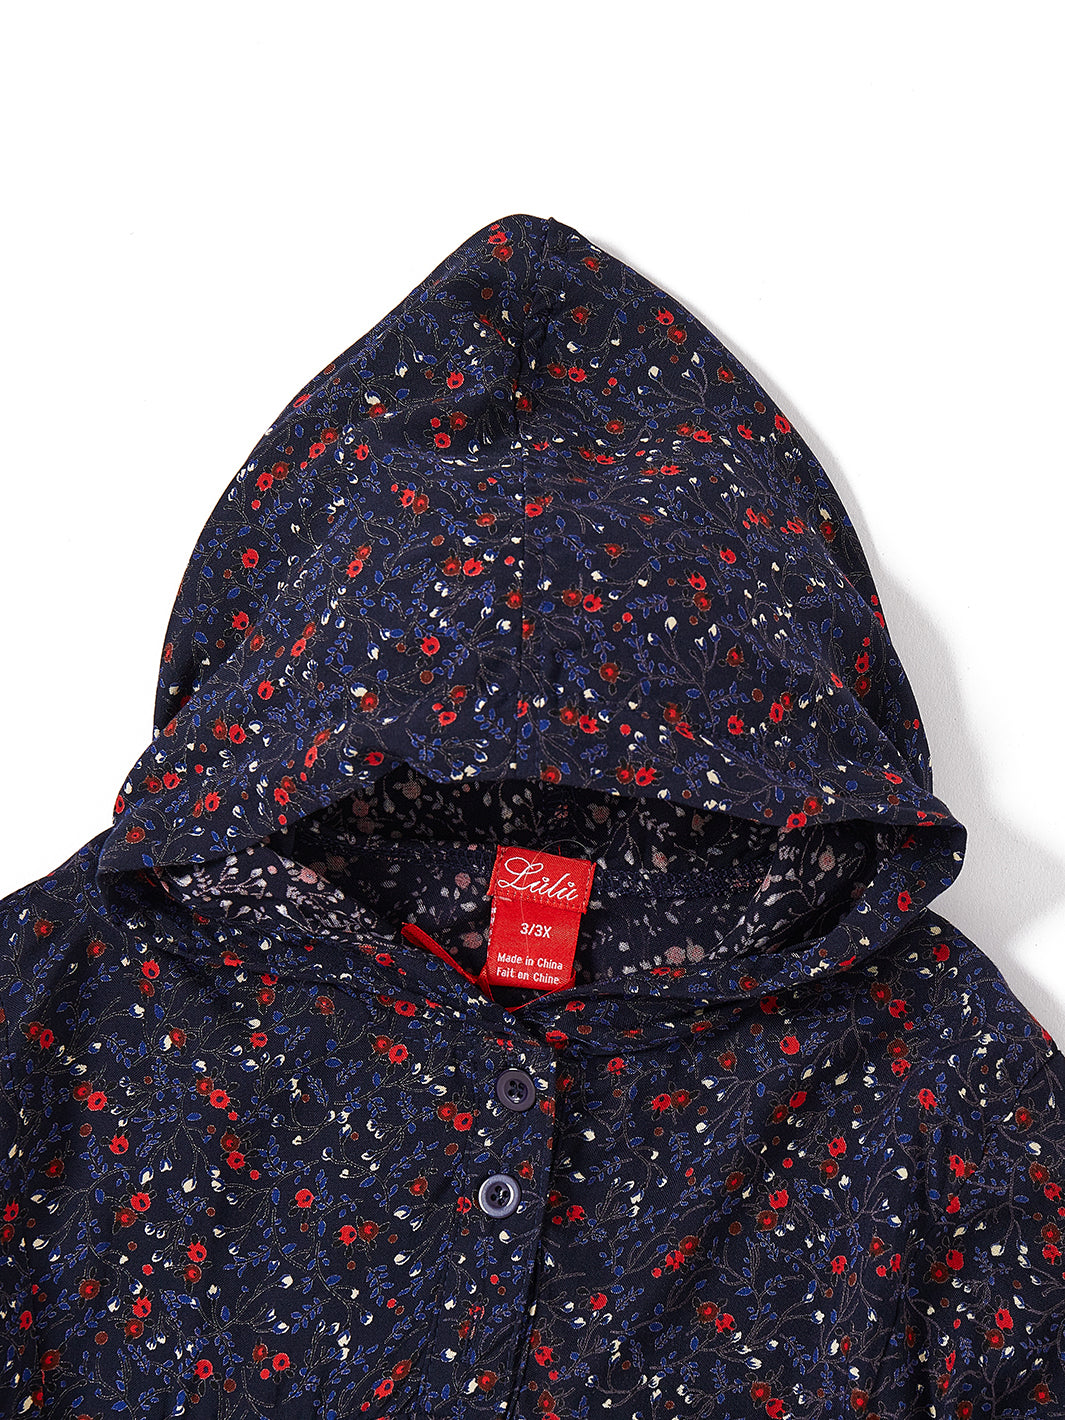 Floral Berry Hooded Top